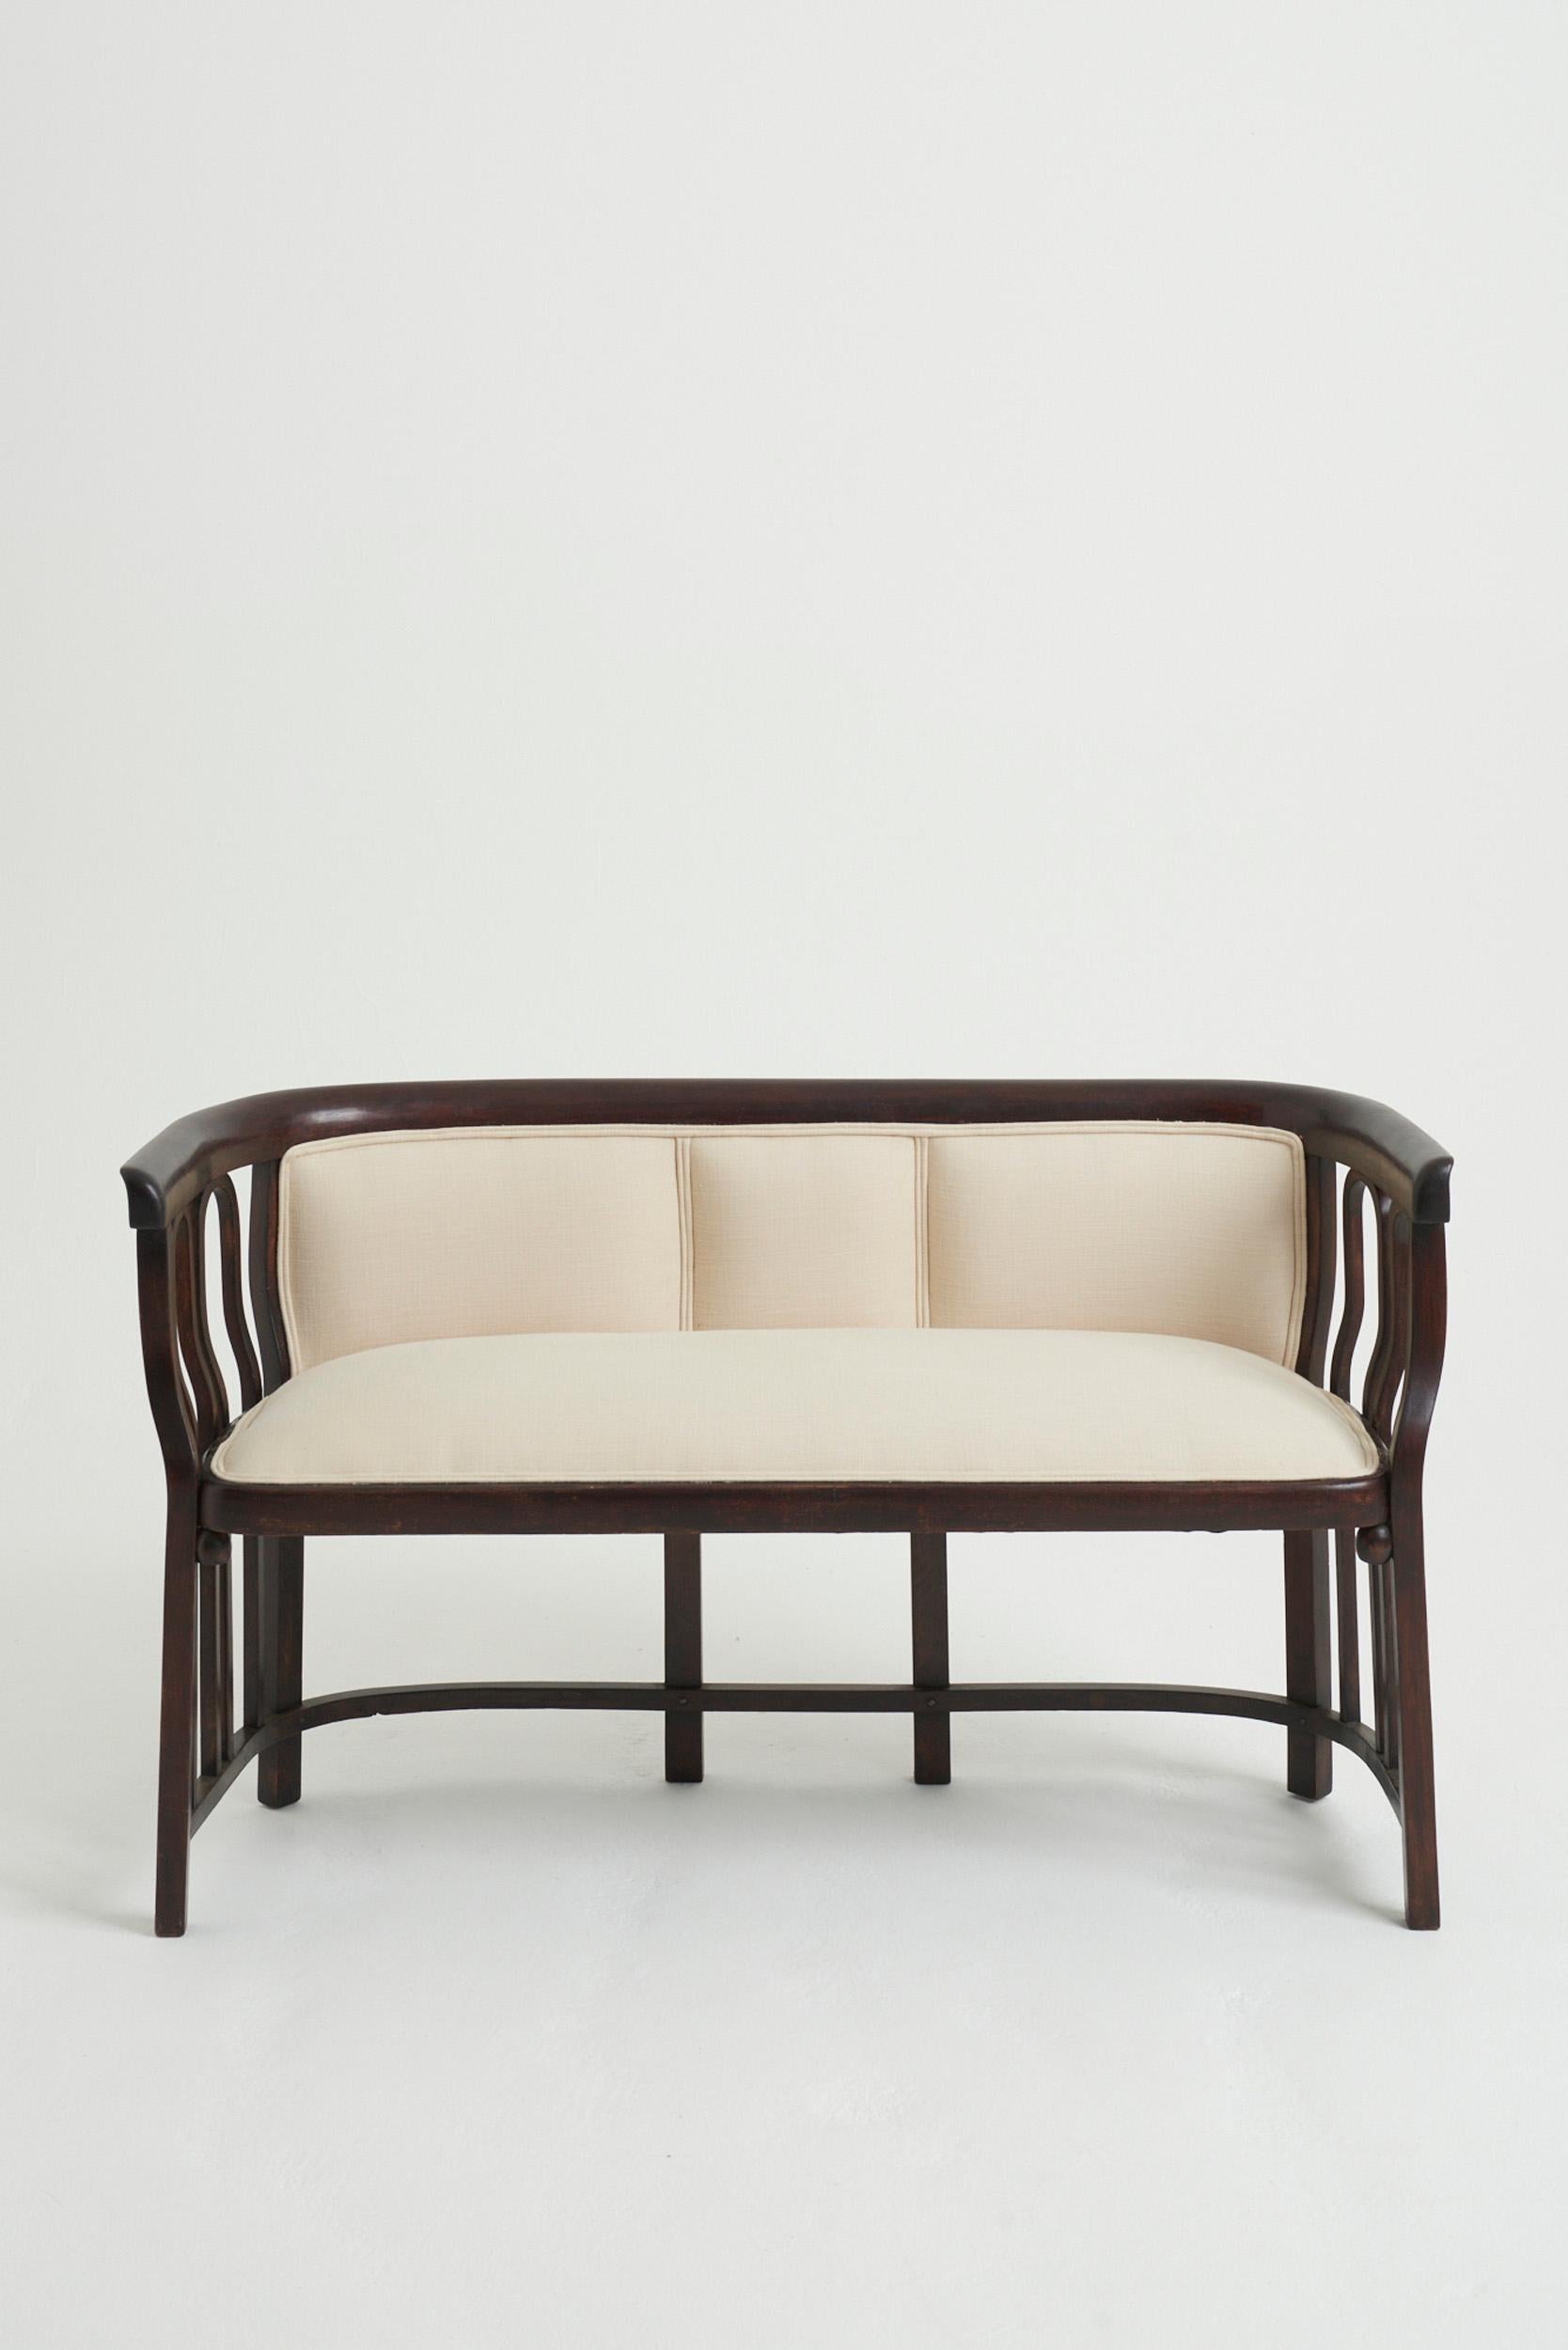 A Vienna Secession settee
Austria, early 20th Century
